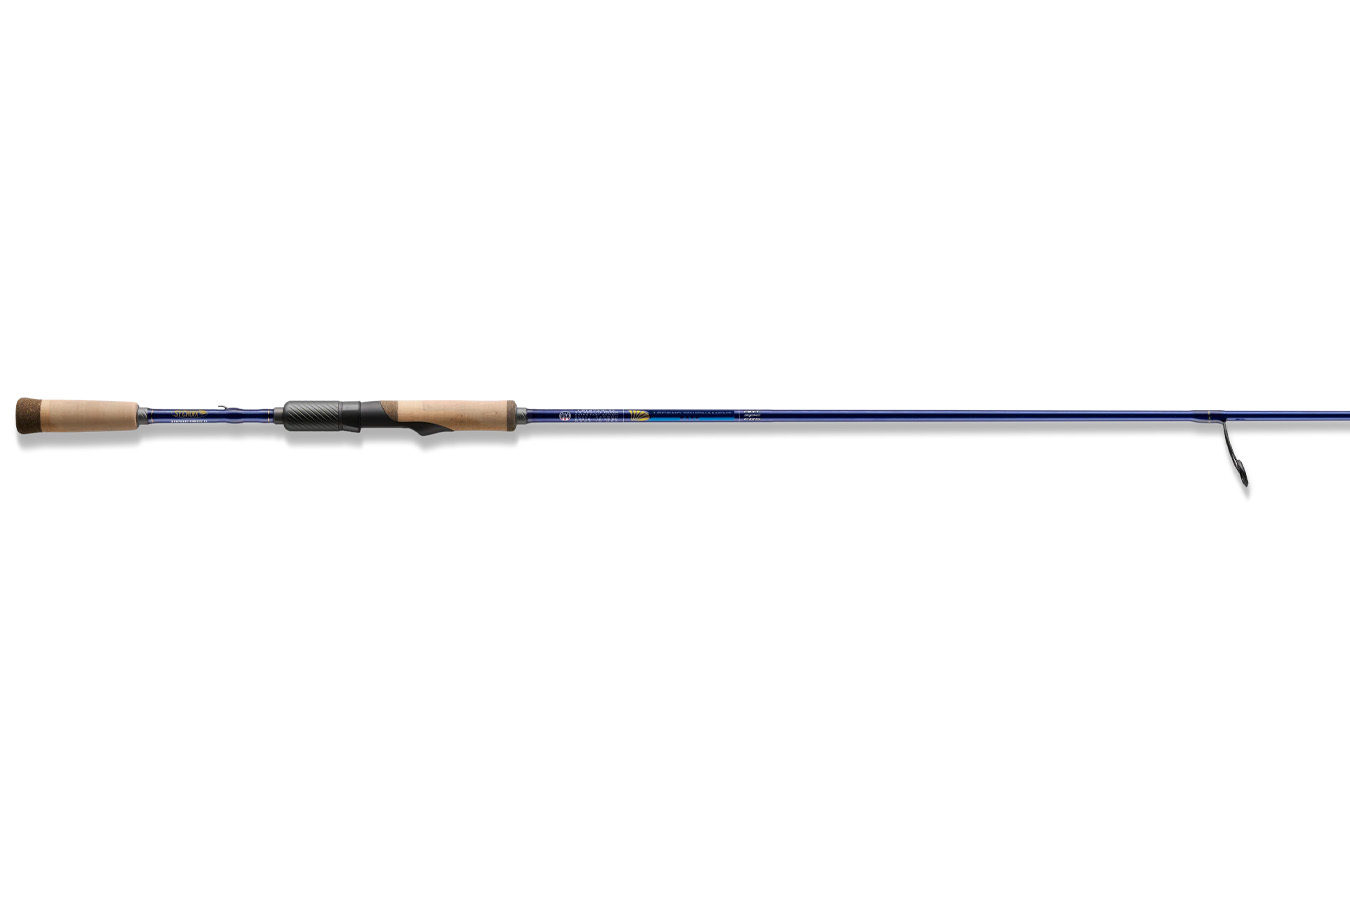 Discount St Croix Legend Tournament Bass 7ft 1in Spinning Rod M